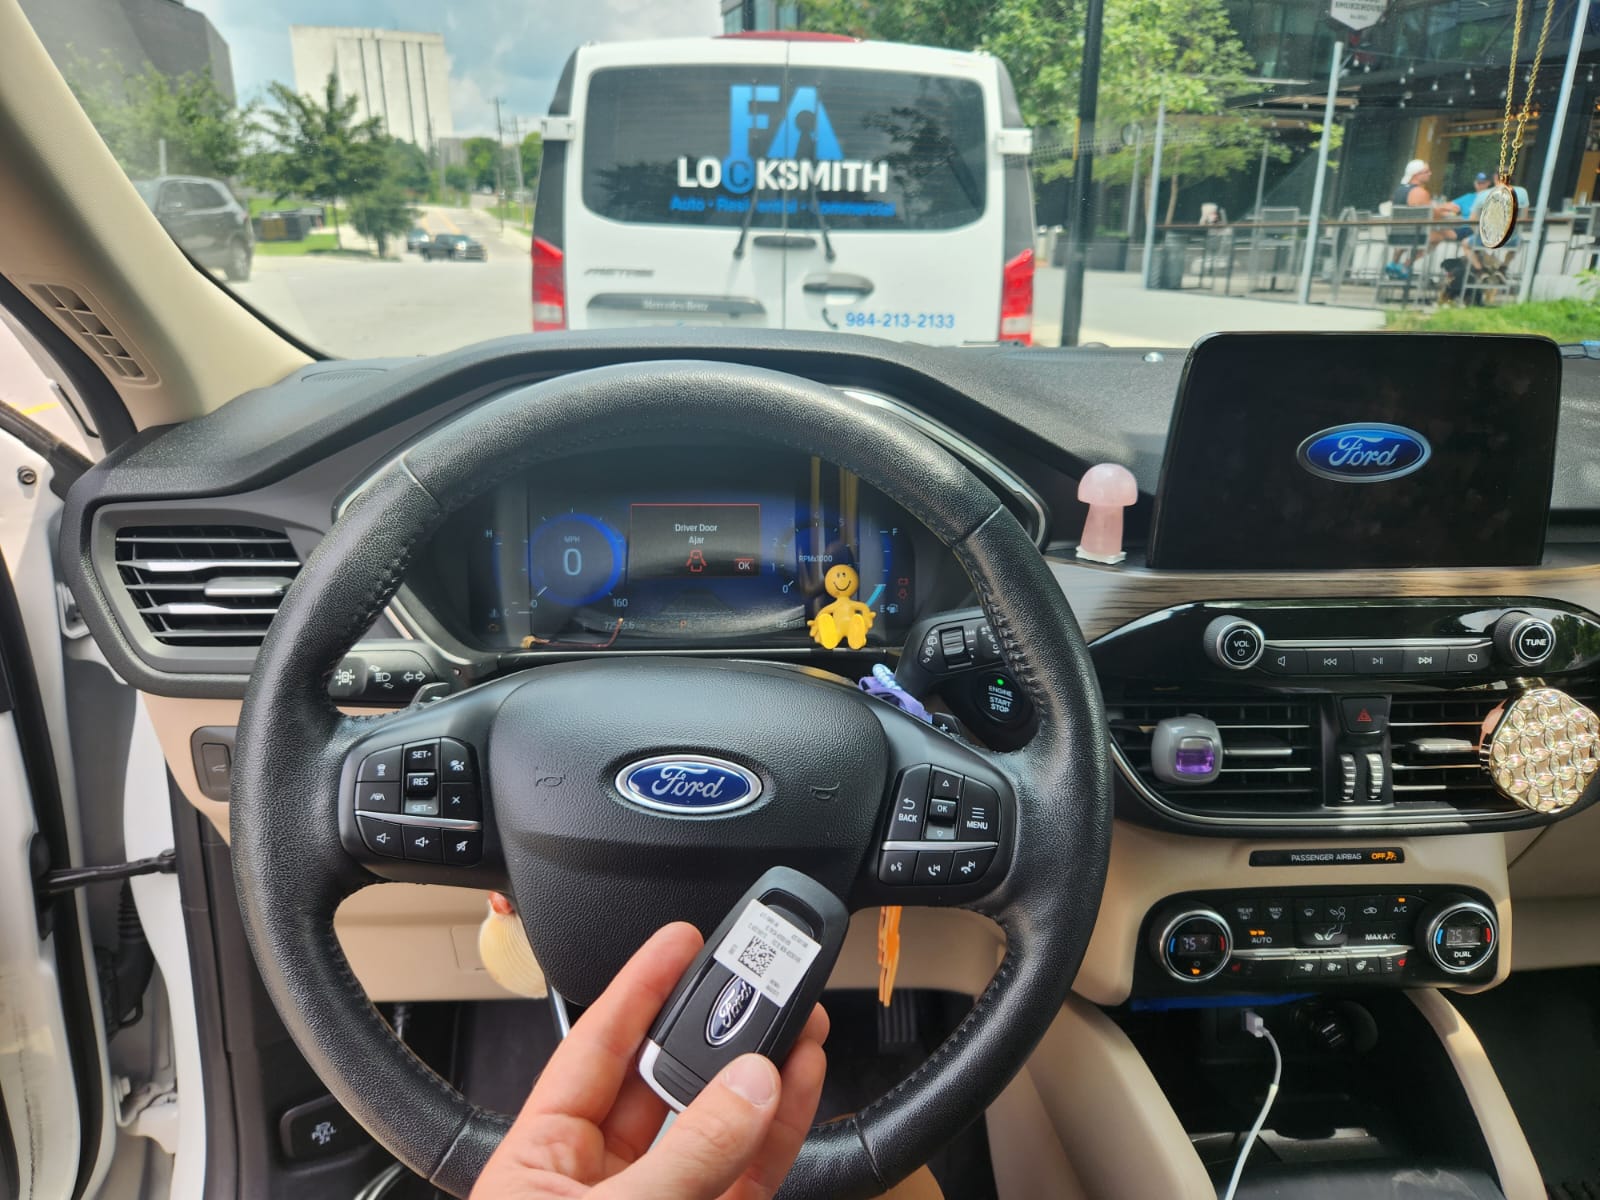 Ford escape key replacement Raleigh NC (1)